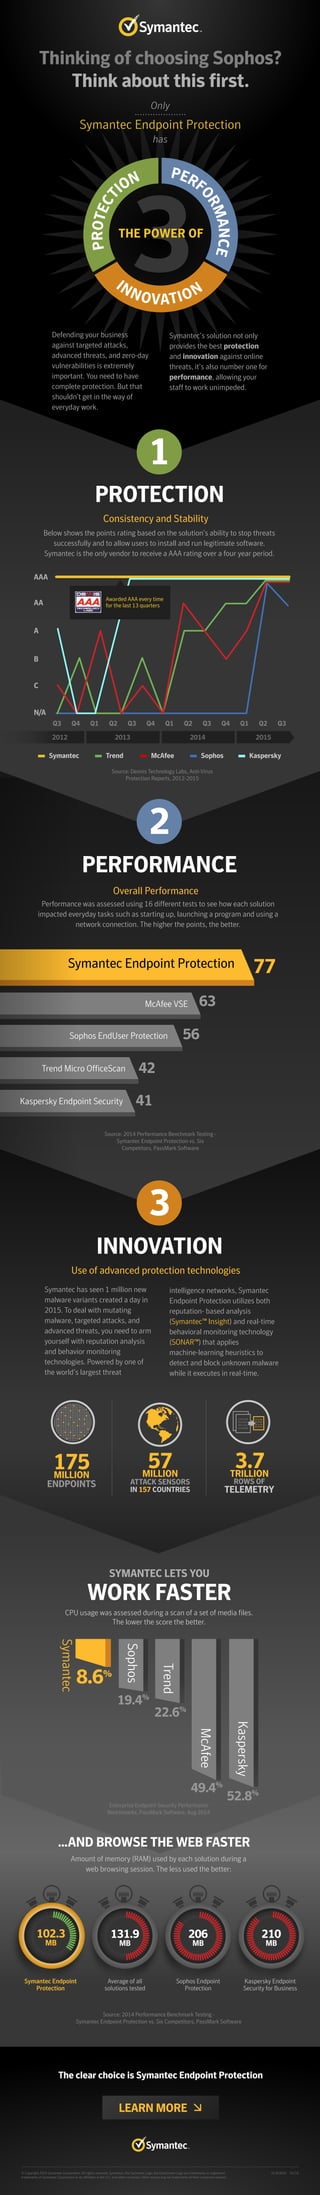 Symantec has seen 1 million new
malware variants created a day in
2015. To deal with mutating
malware, targeted attacks, and
advanced threats, you need to arm
yourself with reputation analysis
and behavior monitoring
technologies. Powered by one of
the world’s largest threat
intelligence networks, Symantec
Endpoint Protection utilizes both
reputation- based analysis
(Symantec™ Insight) and real-time
behavioral monitoring technology
(SONAR™) that applies
machine-learning heuristics to
detect and block unknown malware
while it executes in real-time.
INNOVATION
SYMANTEC LETS YOU
WORK FASTER
Use of advanced protection technologies
THE POWER OF
PROTECT
ION PERF
ORMANCE
INNOVATION
Below shows the points rating based on the solution’s ability to stop threats
successfully and to allow users to install and run legitimate software.
Symantec is the only vendor to receive a AAA rating over a four year period.
Thinking of choosing Sophos?
Think about this first.
Symantec Endpoint Protection
Only
has
Defending your business
against targeted attacks,
advanced threats, and zero-day
vulnerabilities is extremely
important. You need to have
complete protection. But that
shouldn’t get in the way of
everyday work.
Symantec’s solution not only
provides the best protection
and innovation against online
threats, it’s also number one for
performance, allowing your
staff to work unimpeded.
1
PROTECTION
McAfee VSE
Sophos EndUser Protection
Trend Micro OfficeScan
Kaspersky Endpoint Security
Symantec Endpoint Protection
Source: Dennis Technology Labs, Anti-Virus
Protection Reports, 2012-2015
2
PERFORMANCE
AAA
AA
B
C
A
N/A
Q3 Q4 Q1 Q2 Q3 Q4 Q1 Q2 Q3 Q4 Q1 Q2 Q3
2012 2013 2014 2015
Symantec Trend McAfee Sophos Kaspersky
Overall Performance
Consistency and Stability
3
Source: 2014 Performance Benchmark Testing -
Symantec Endpoint Protection vs. Six
Competitors, PassMark Software
77
63
56
42
41
Performance was assessed using 16 different tests to see how each solution
impacted everyday tasks such as starting up, launching a program and using a
network connection. The higher the points, the better.
Source: 2014 Performance Benchmark Testing -
Symantec Endpoint Protection vs. Six Competitors, PassMark Software
The clear choice is Symantec Endpoint Protection
Average of all
solutions tested
Sophos Endpoint
Protection
206
MB
Kaspersky Endpoint
Security for Business
210
MB
131.9
MB
LEARN MORE
102.3
MB
CPU usage was assessed during a scan of a set of media files.
The lower the score the better.
175MILLION MILLION TRILLION
ENDPOINTS
3.7
ROWS OF
TELEMETRY
57
ATTACK SENSORS
IN 157 COUNTRIES
Awarded AAA every time
for the last 13 quarters
1010100
0010001
0011001
0010000
1010100
0010001
0011001
0010000
Symantec
8.6%
19.4%
22.6%
52.8%
Kaspersky
49.4%
McAfee
Sophos
Trend
Enterprise Endpoint Security Performance
Benchmarks, PassMark Software, Aug 2014
© Copyright 2016 Symantec Corporation. All rights reserved. Symantec, the Symantec Logo, the Checkmark Logo are trademarks or registered
trademarks of Symantec Corporation or its affiliates in the U.S. and other countries. Other names may be trademarks of their respective owners.
21363026 01/16
...AND BROWSE THE WEB FASTER
Amount of memory (RAM) used by each solution during a
web browsing session. The less used the better:
Symantec Endpoint
Protection
 